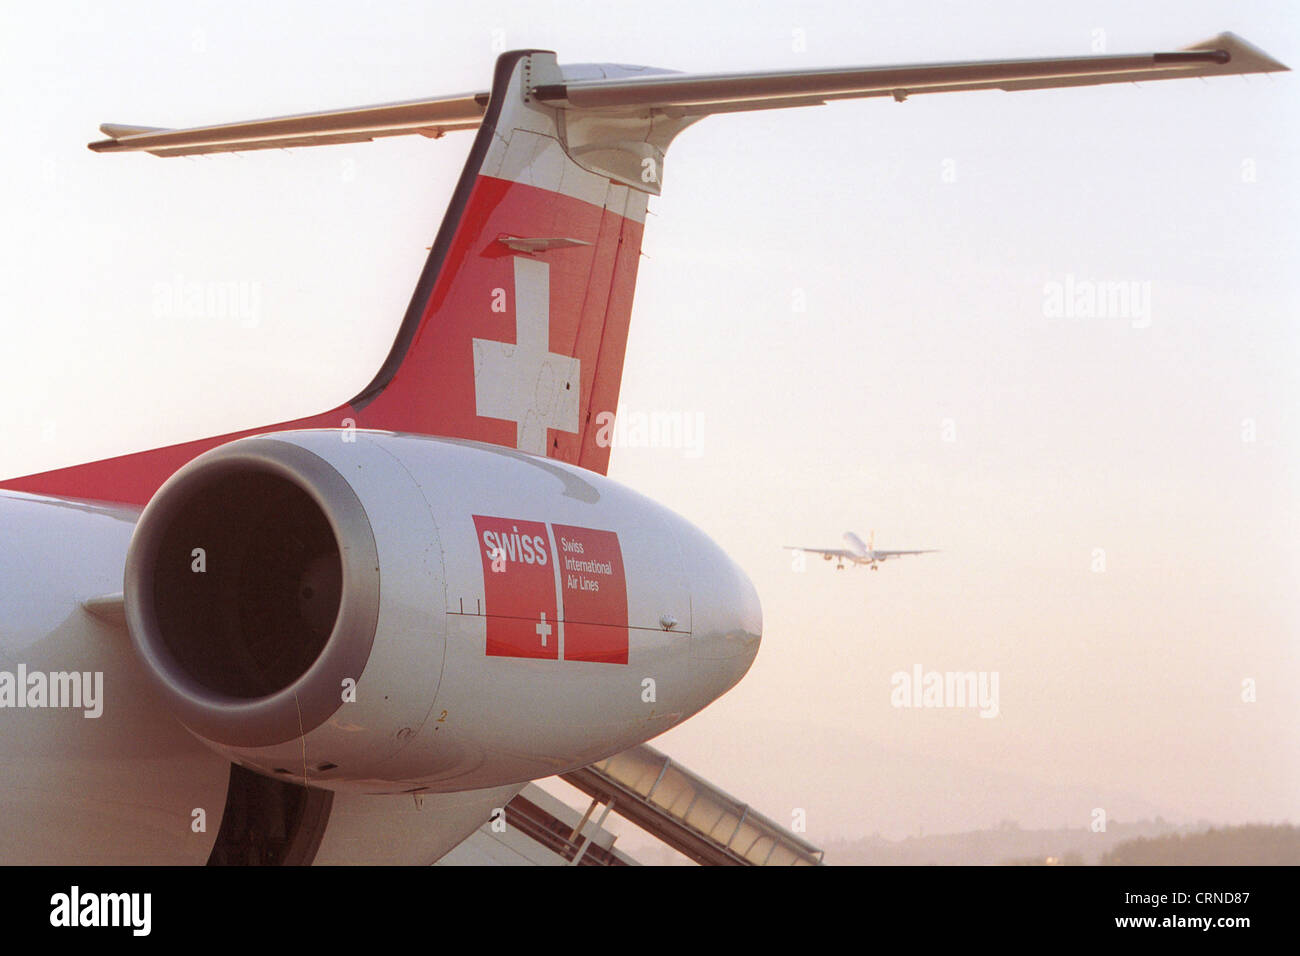 Swiss Airline logo on the rear of a machine Stock Photo